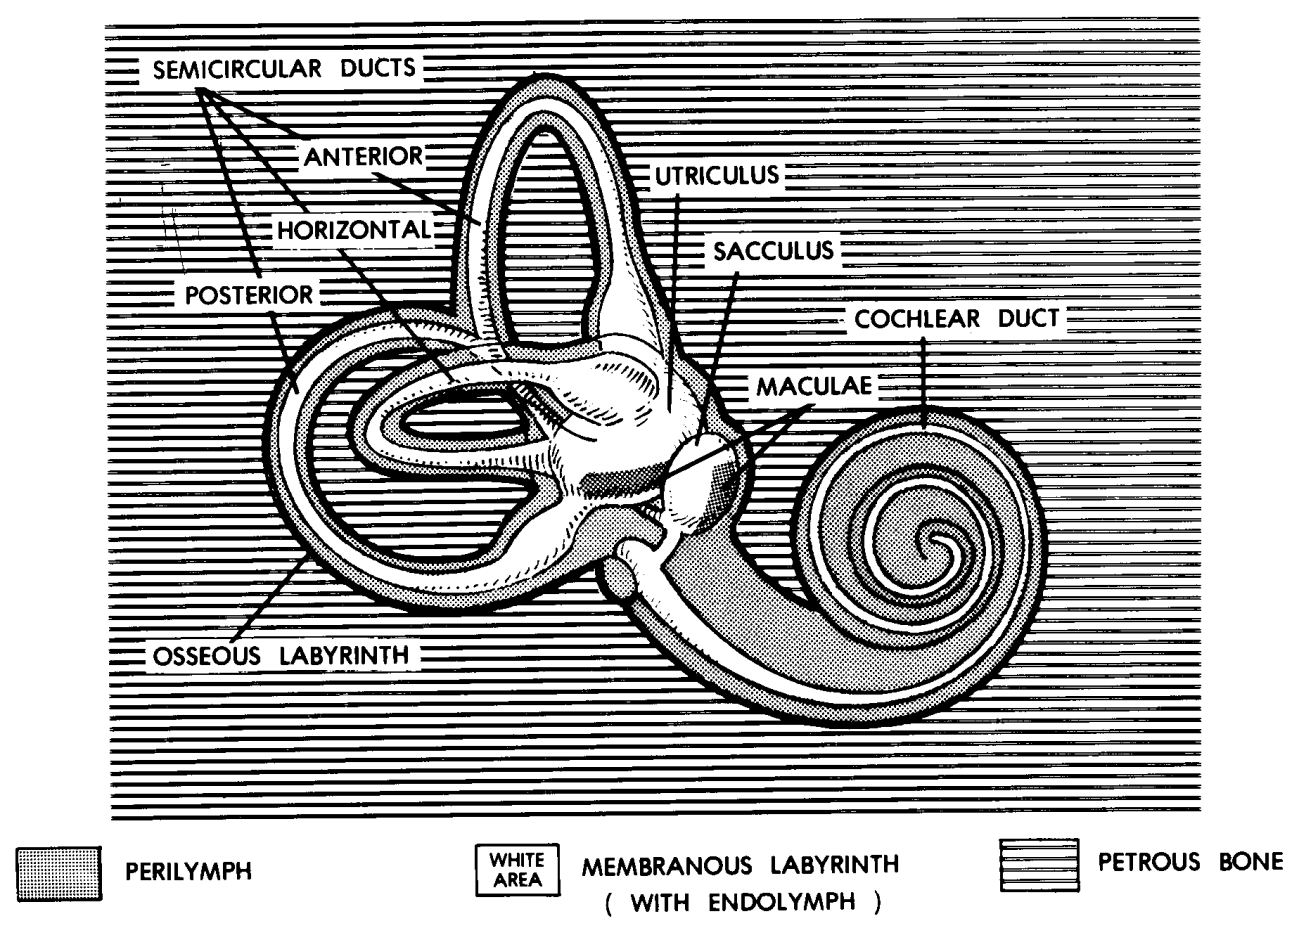 d. Auditory (Eustachian) Tube. The auditory tube is a passage connecting the middle ear cavity with the nasopharynx.